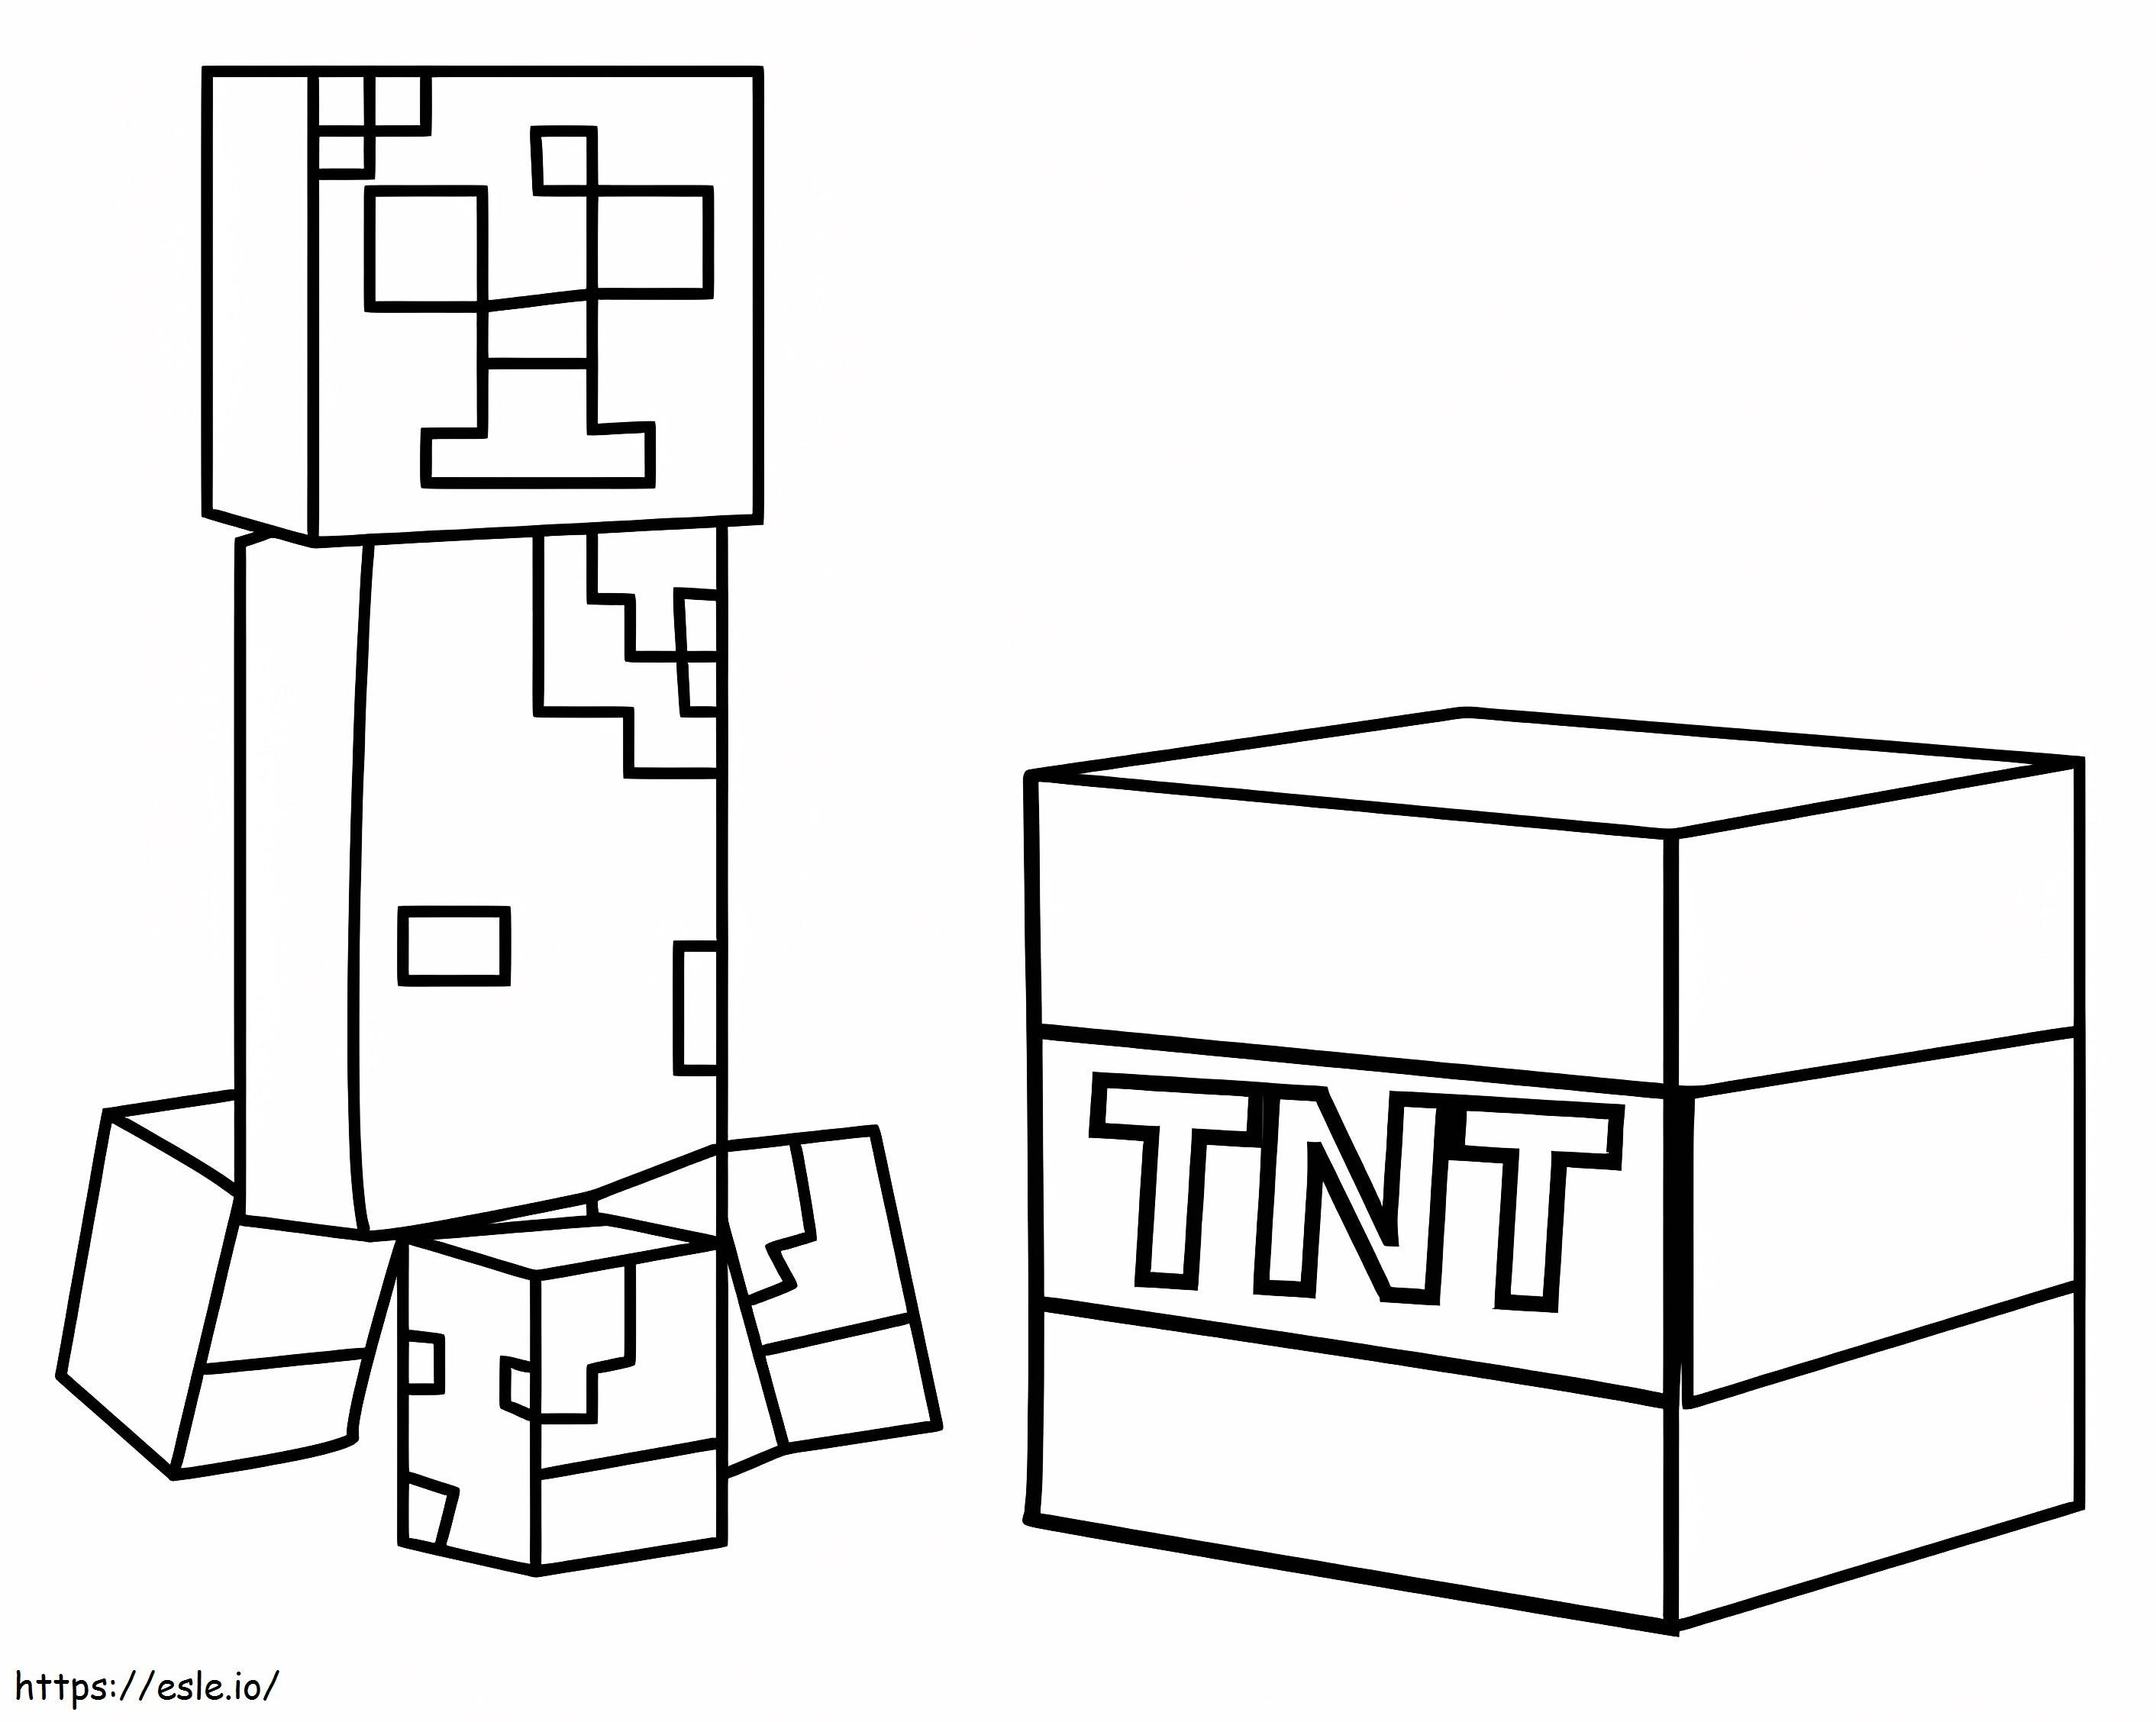 Minecraft Creeper With Tnt Block coloring page